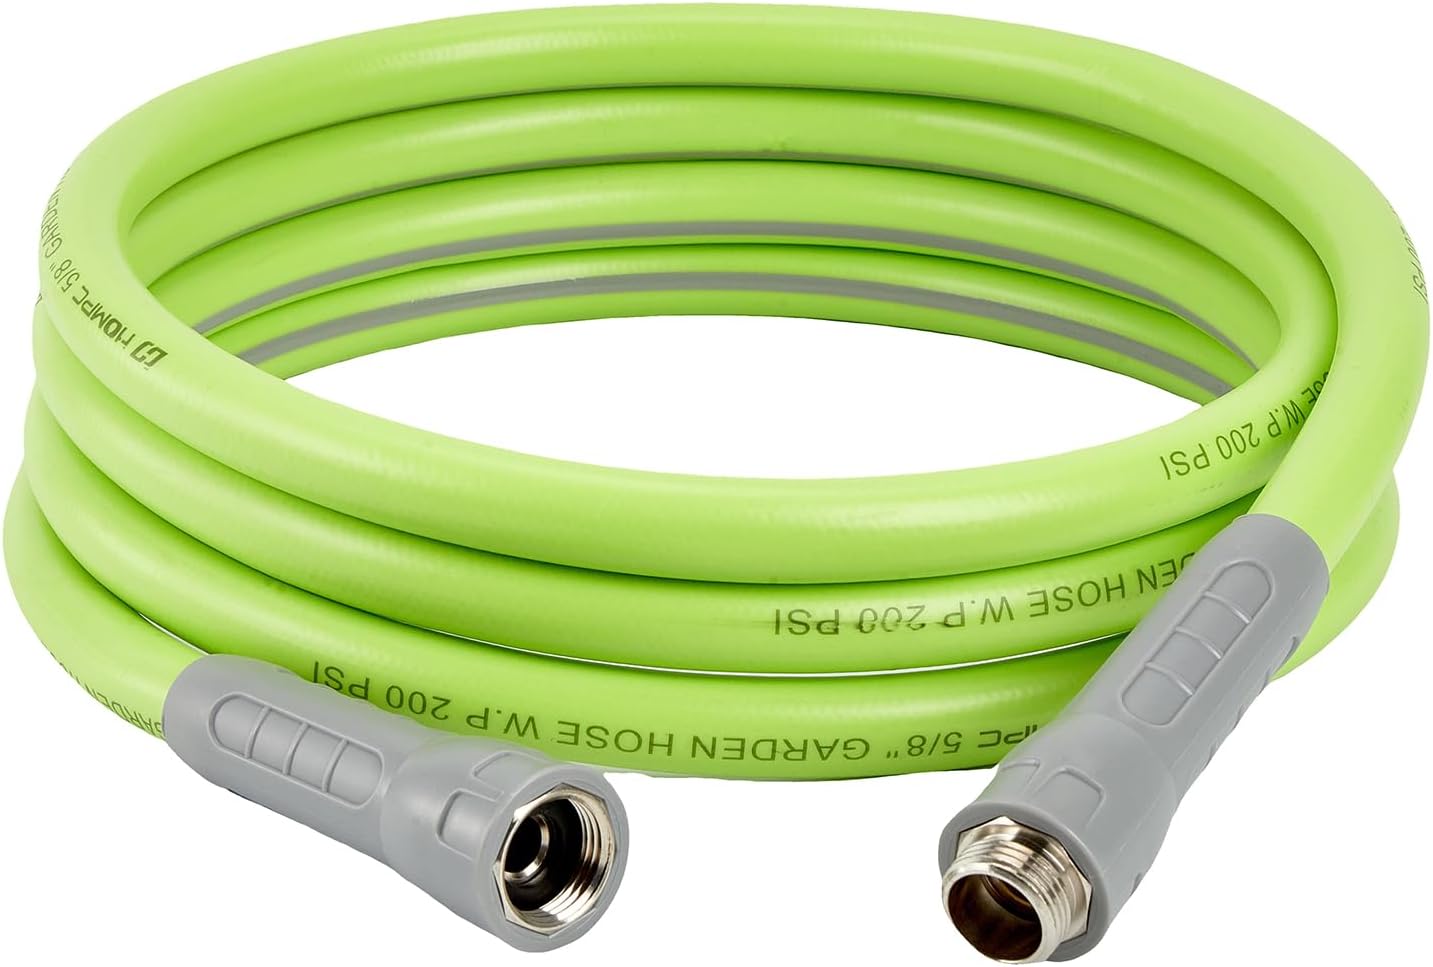 HQMPC Hose Garden Hose With Swivel Grip 5/8 in. Water Hose Heavy Duty Durable Material Water Hose with Solid Fittings (Green)